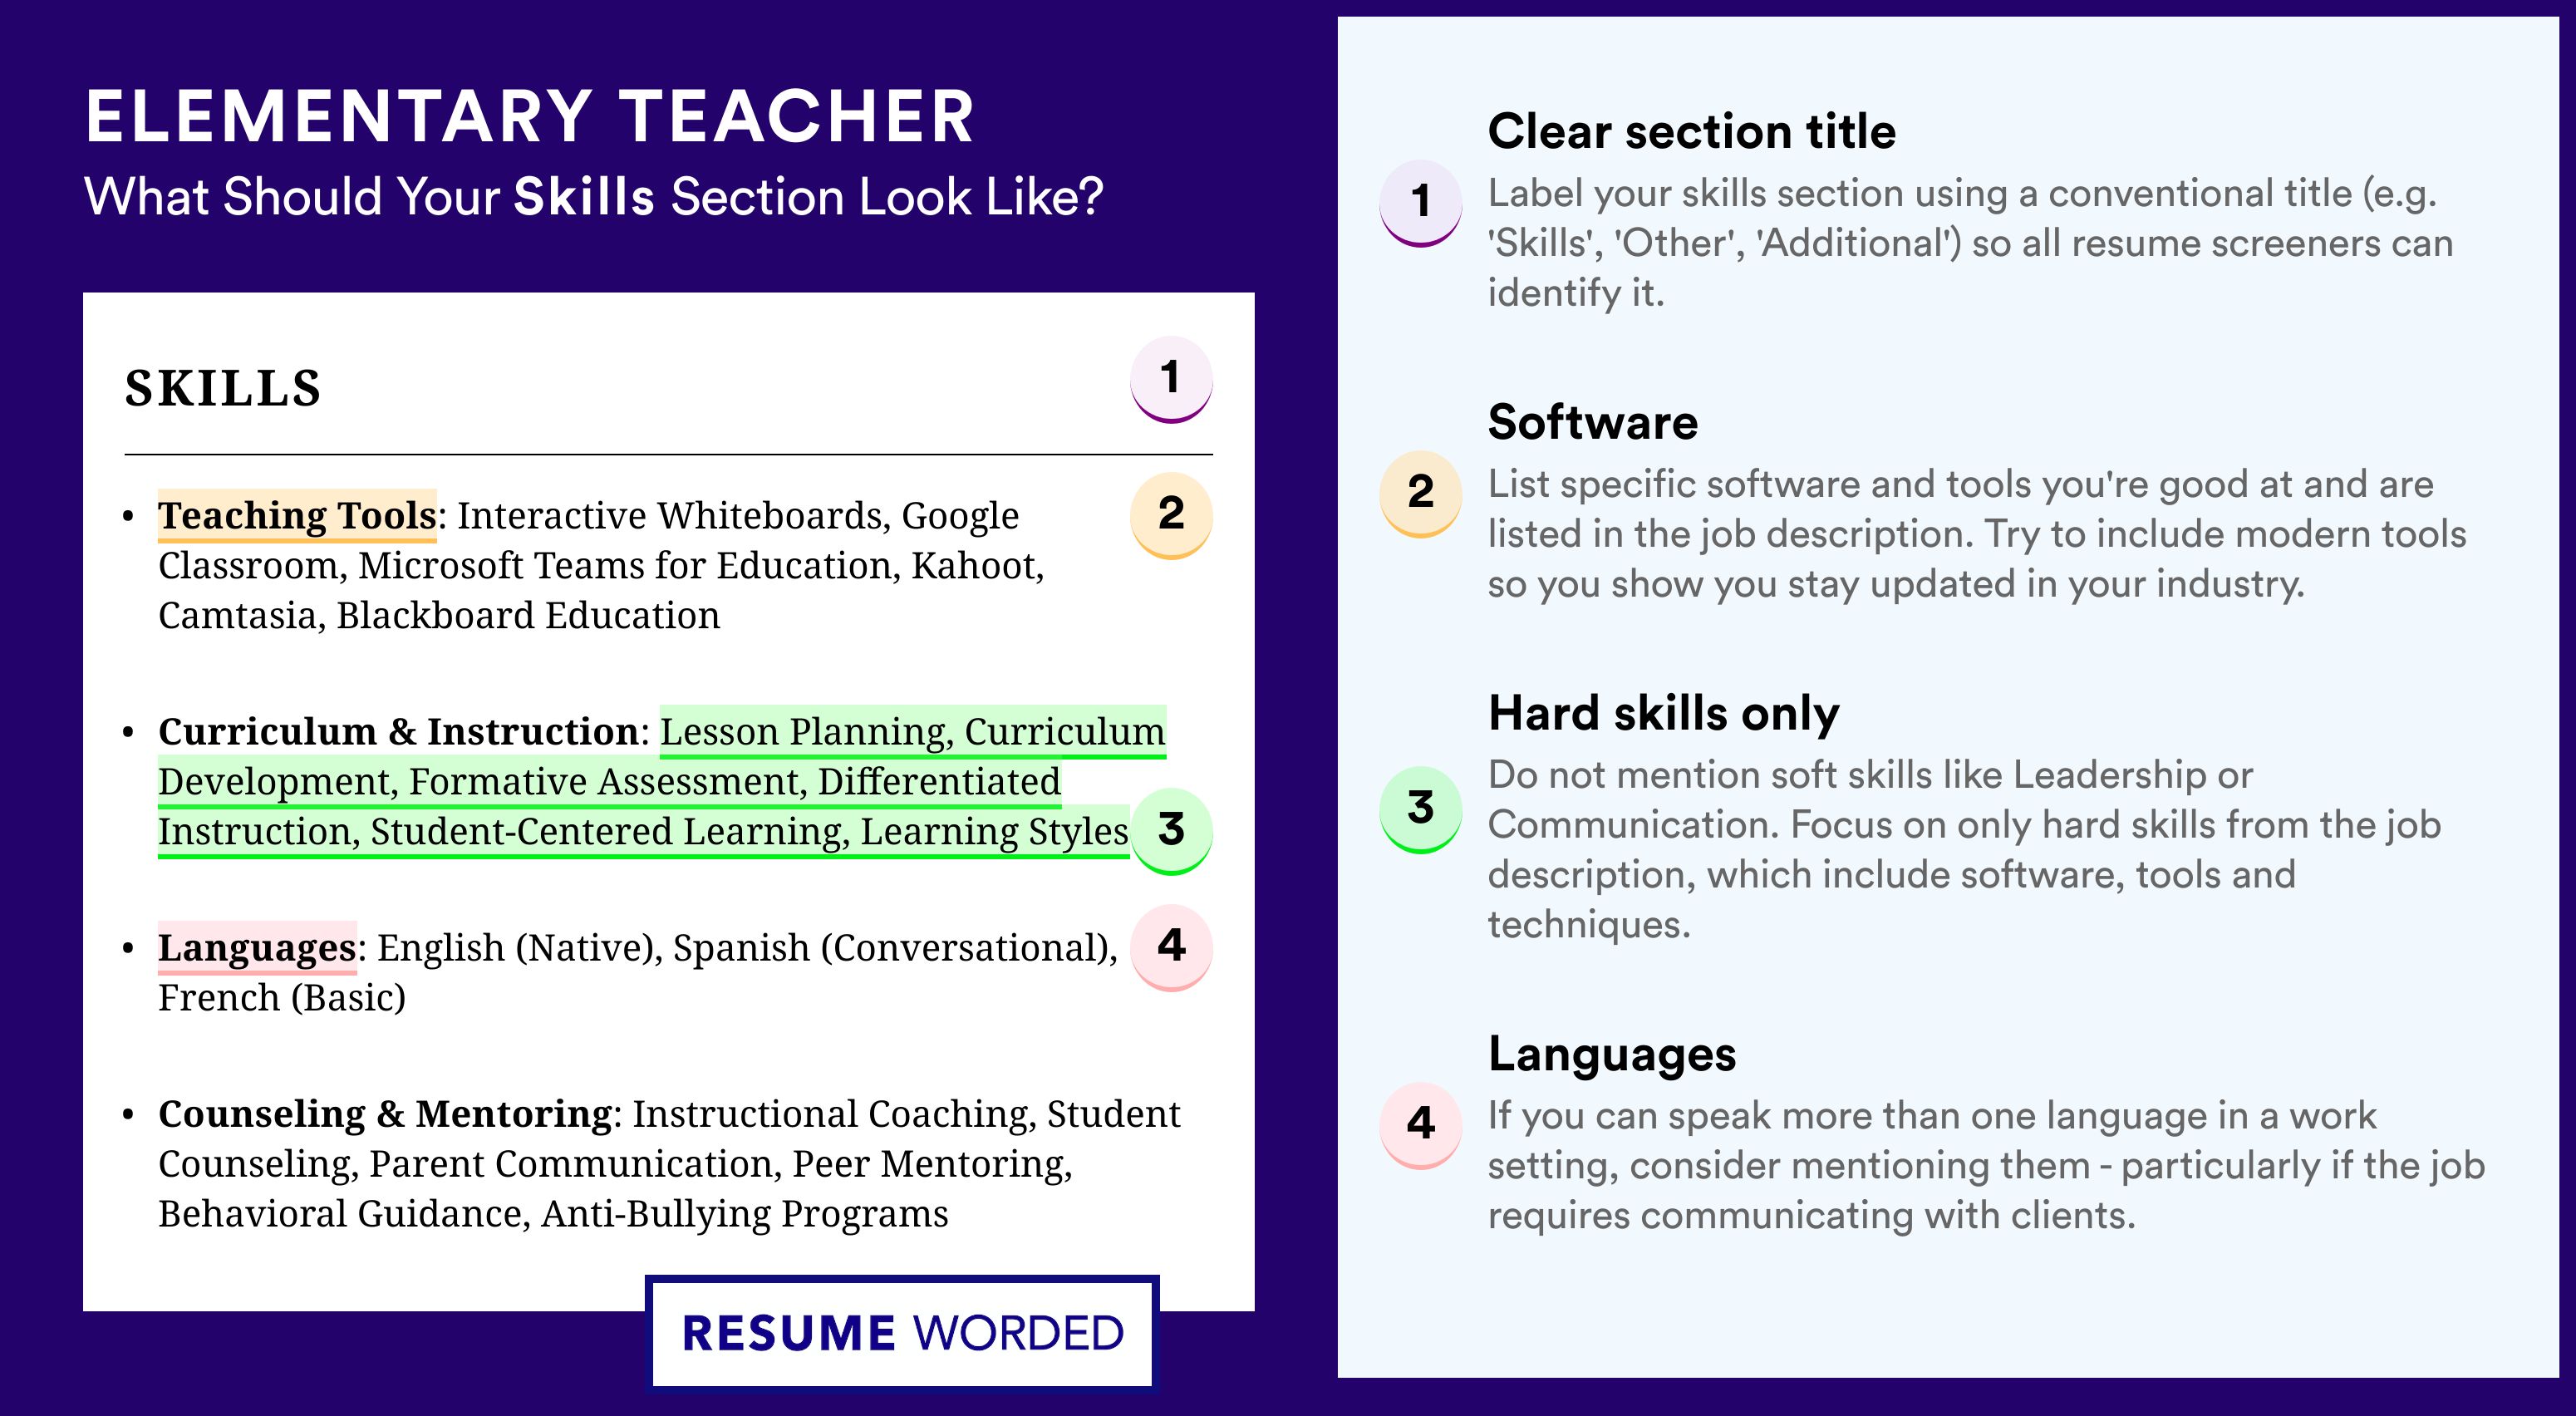 How To Write Your Skills Section - Elementary Teacher Roles